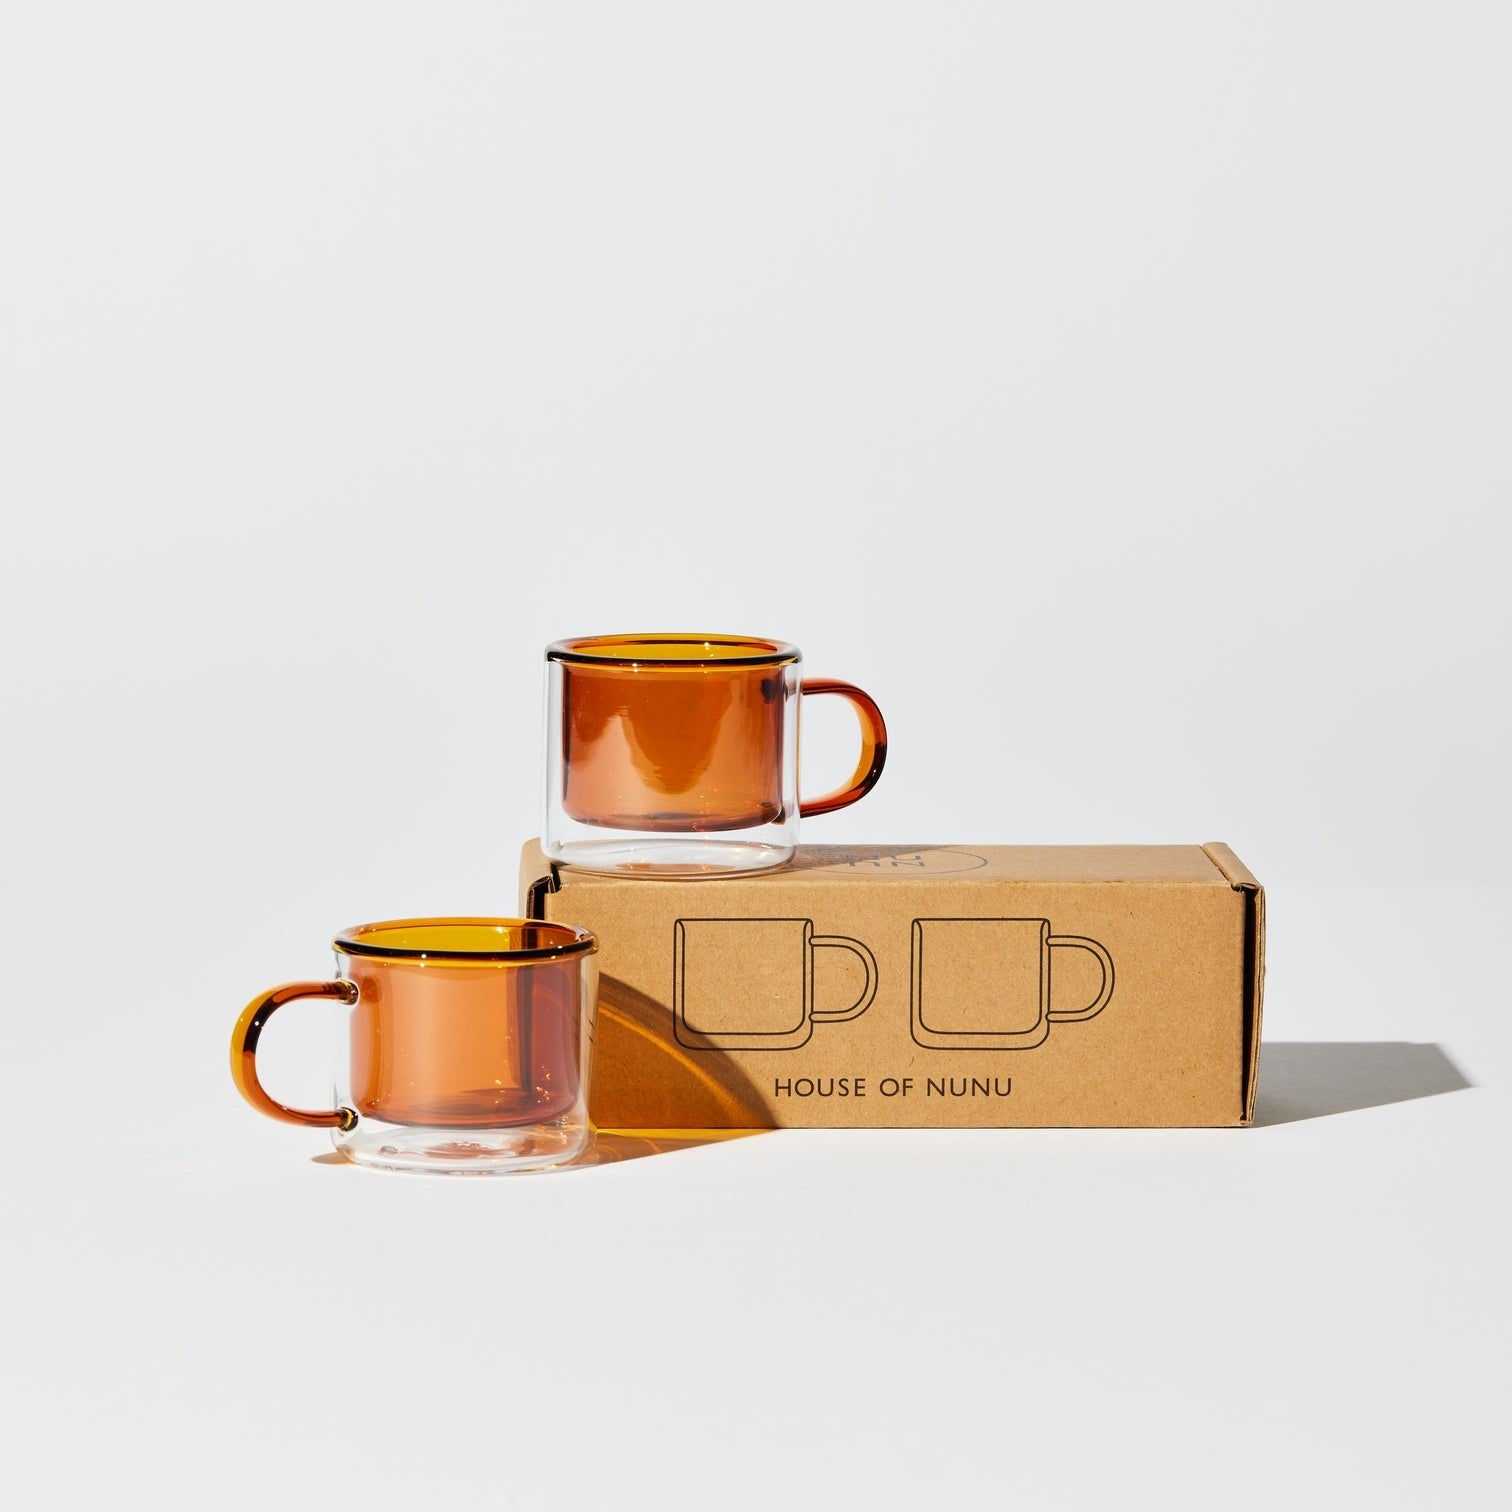 HOUSE OF NUNU SHORTY ESPRESSO CUP SET IN AMBER